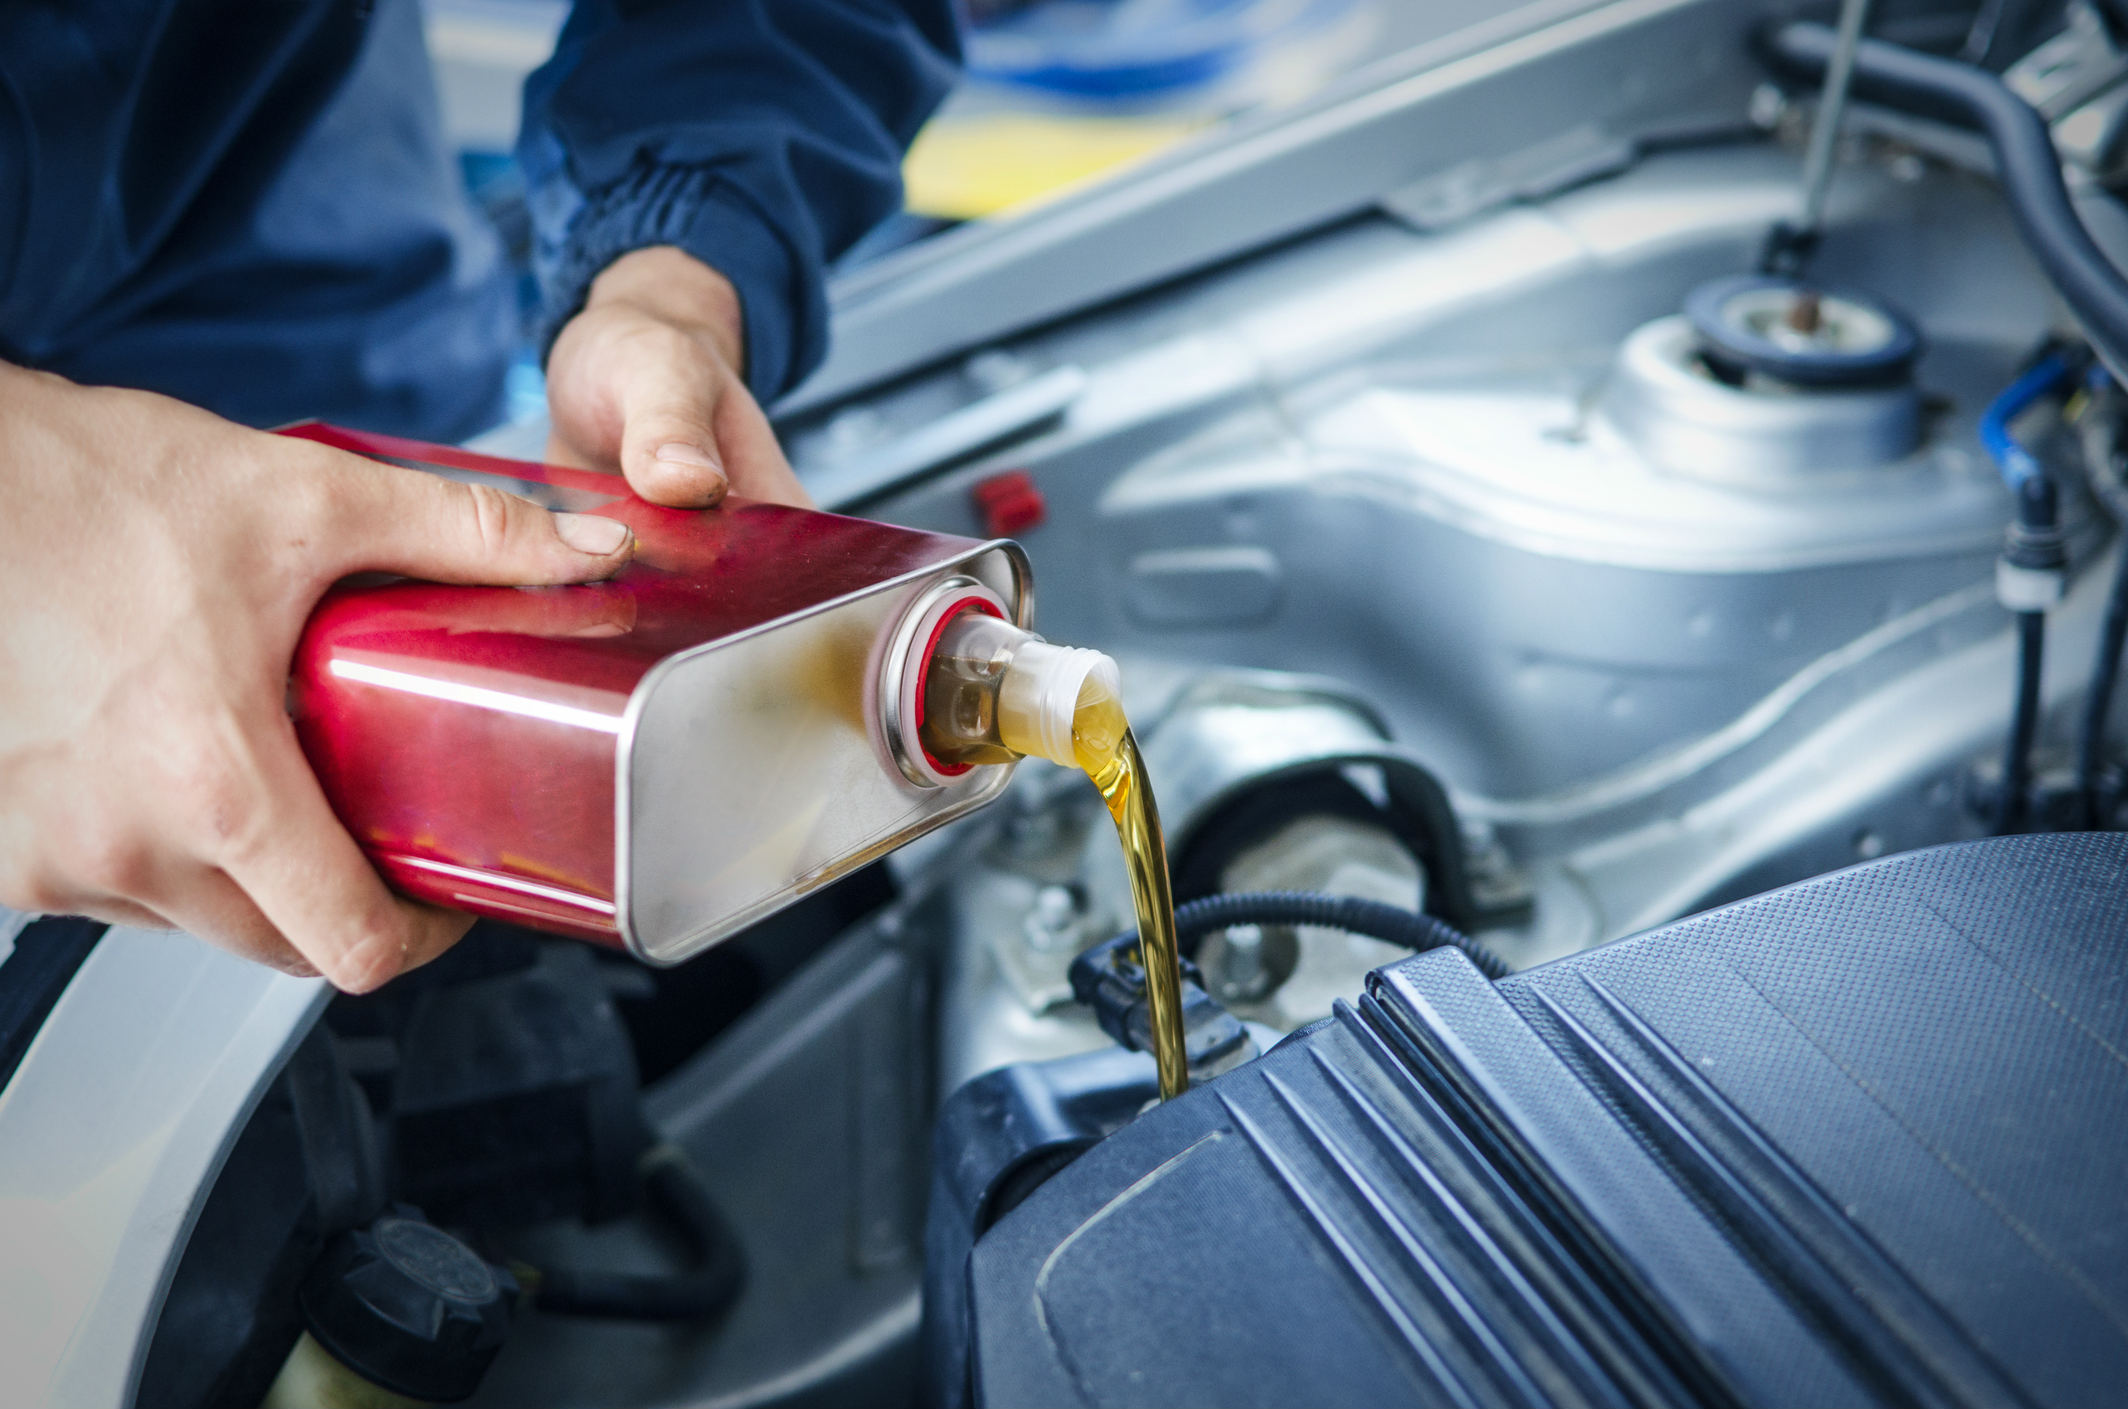 What's the best way to check an engine's oil level?